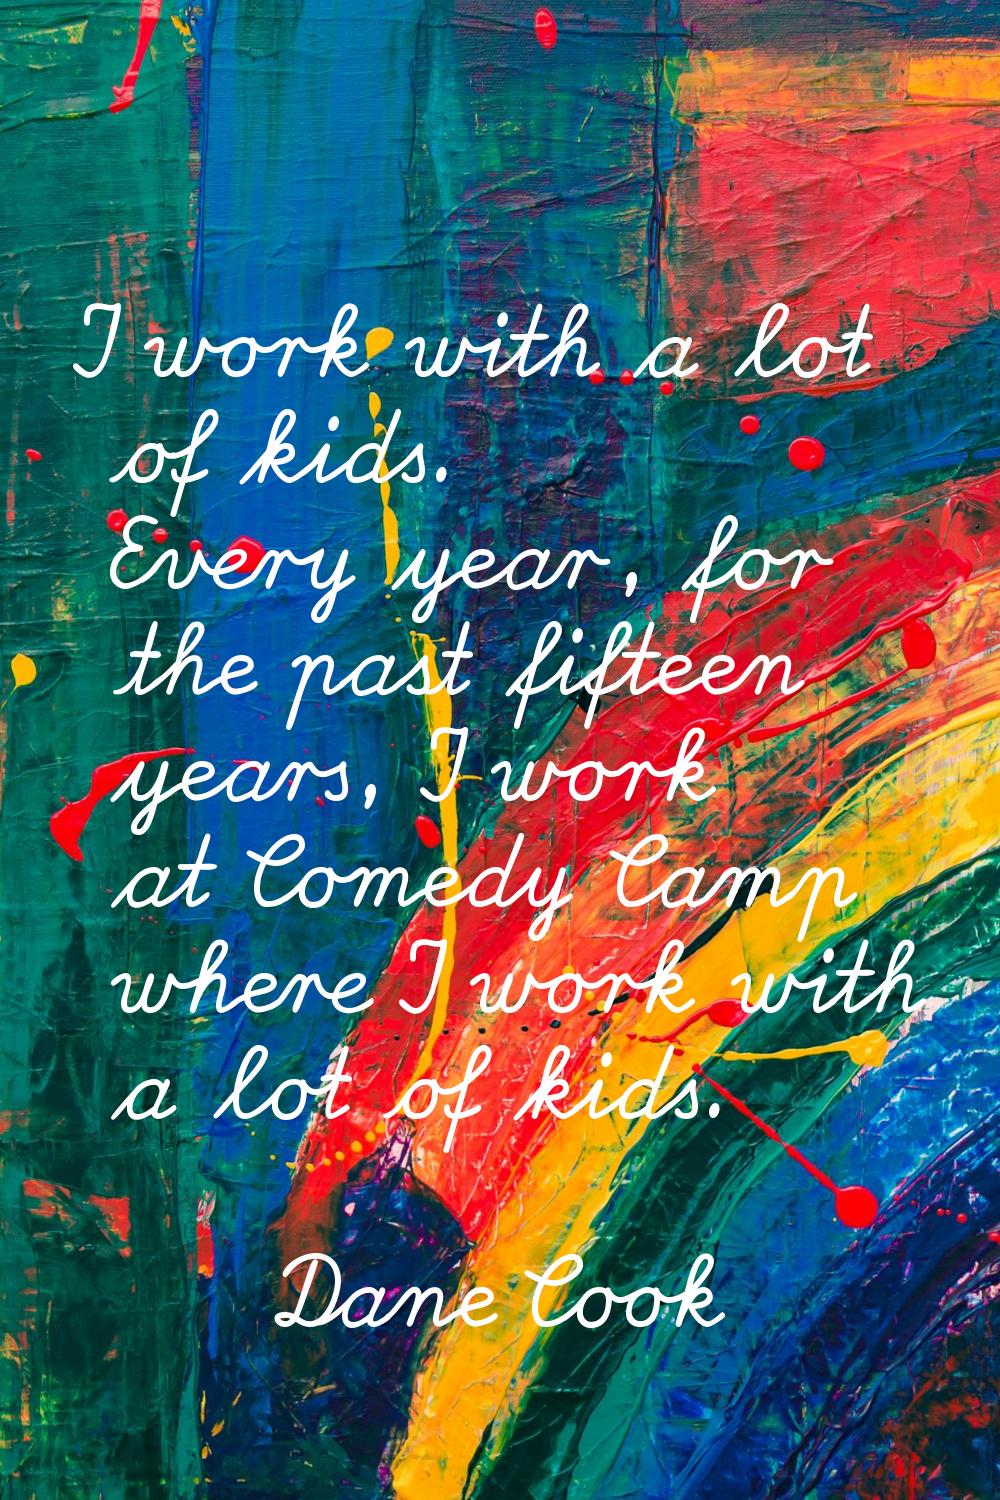 I work with a lot of kids. Every year, for the past fifteen years, I work at Comedy Camp where I wo